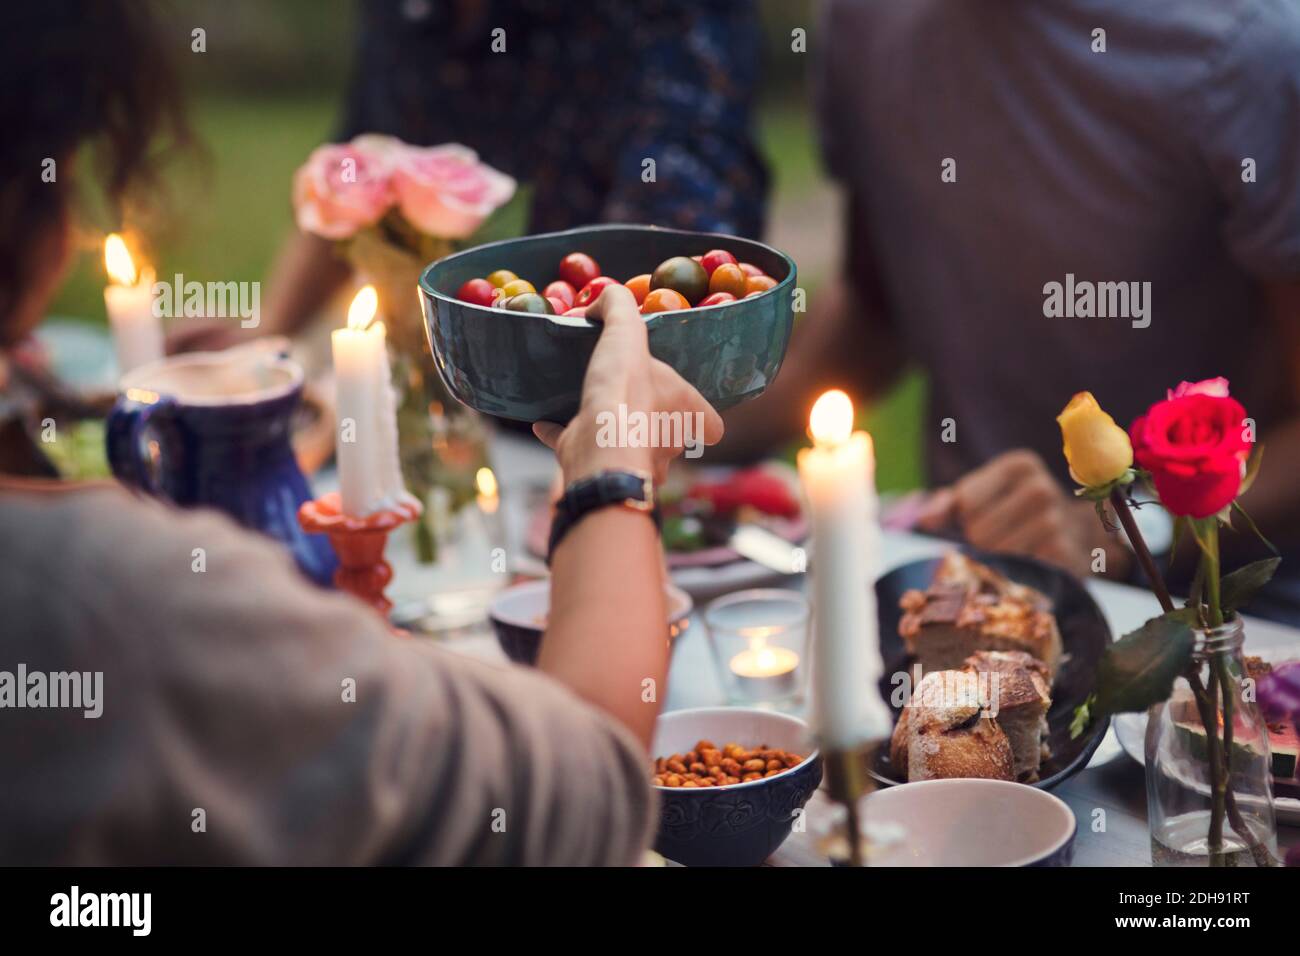 Cropped image of woman serving food to friends at garden party Stock Photo